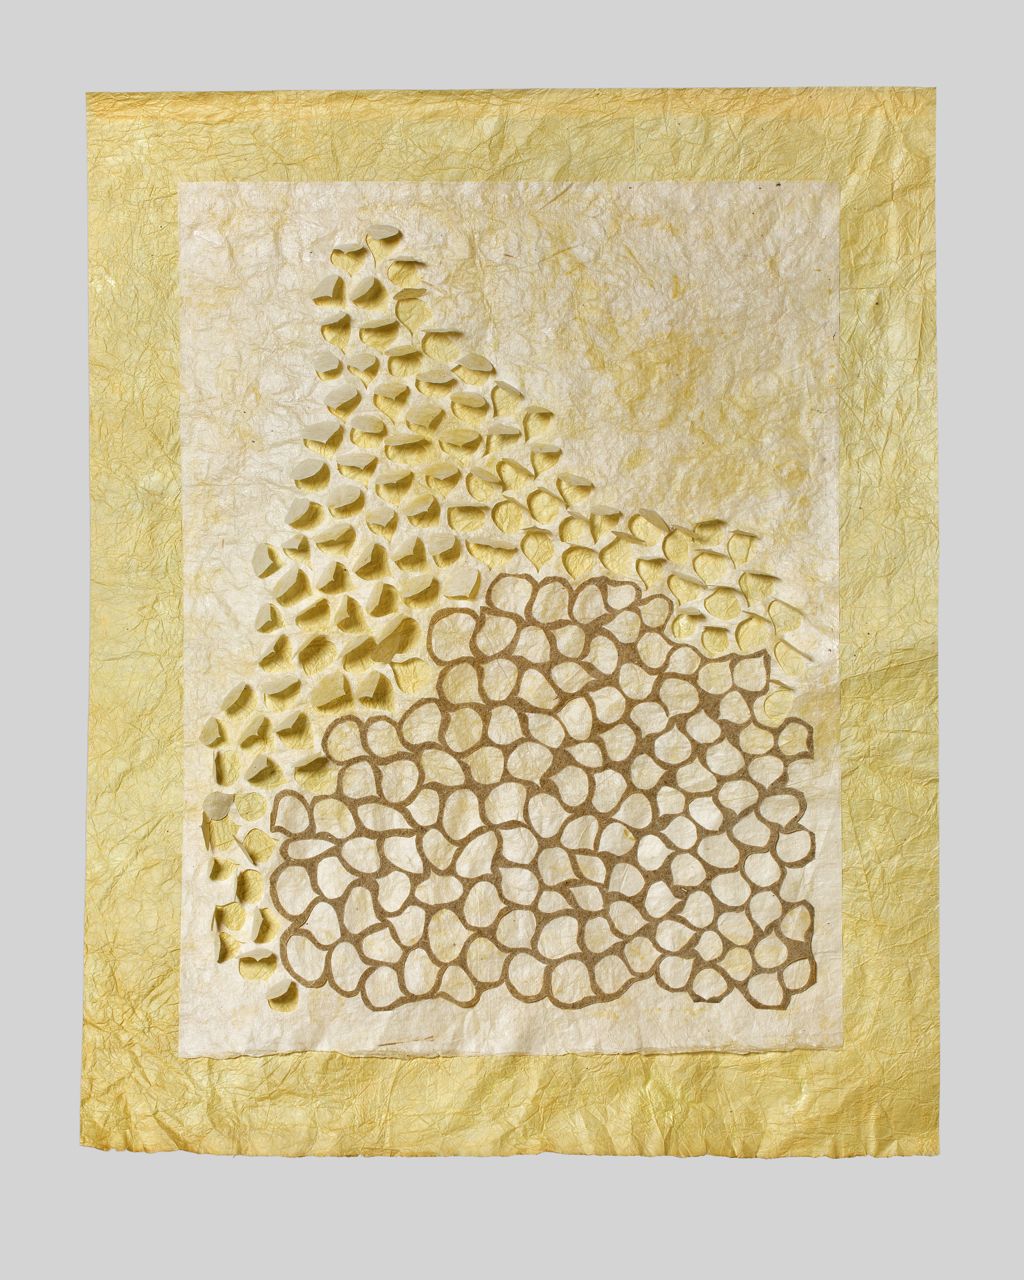 Vacancy study (2014). Pomegranate dye and konjac on hanji, hosta paper. 23.5 x 18.5". Private collection.